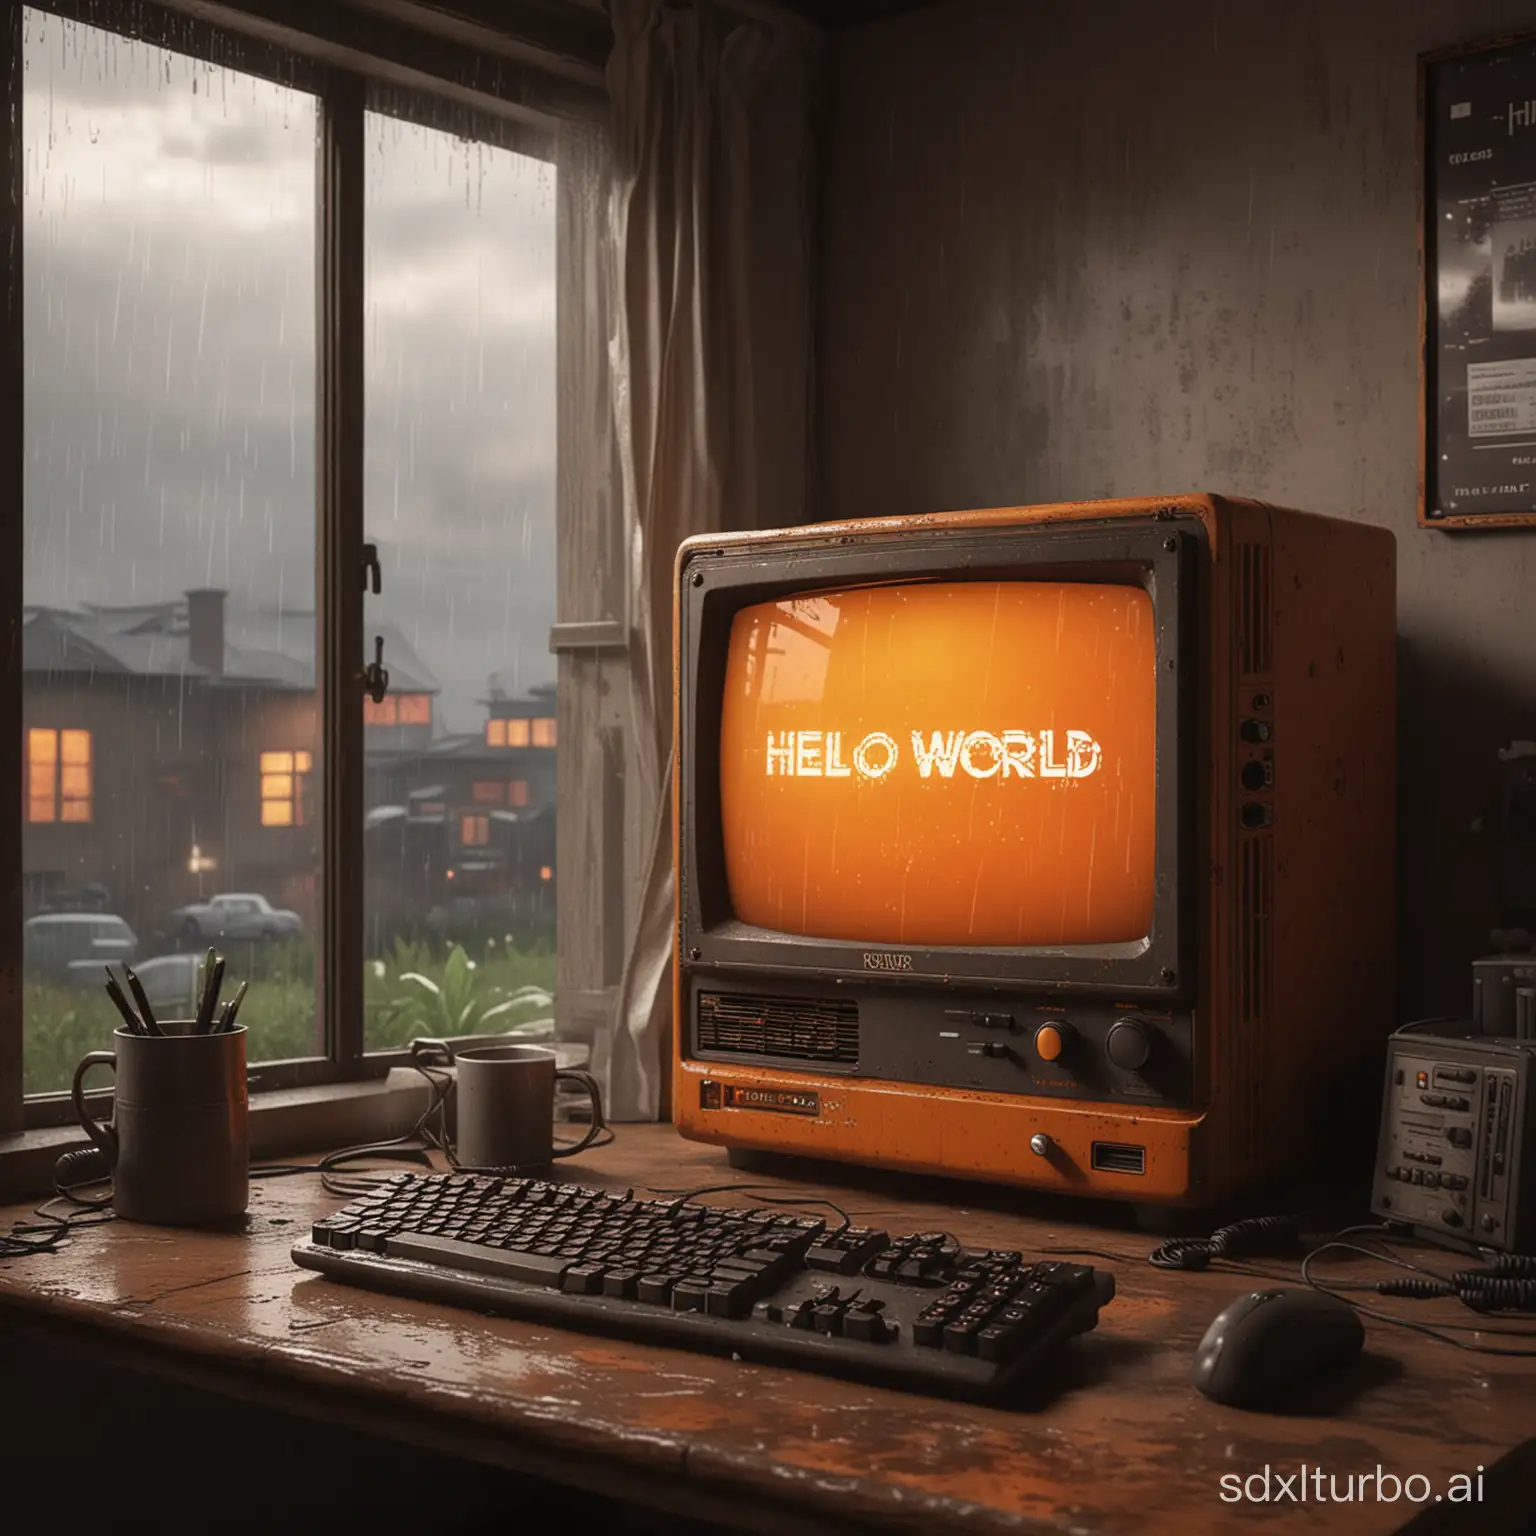 Retro-PC-in-Dystopian-House-Hello-World-Display-in-Rainy-Atmosphere